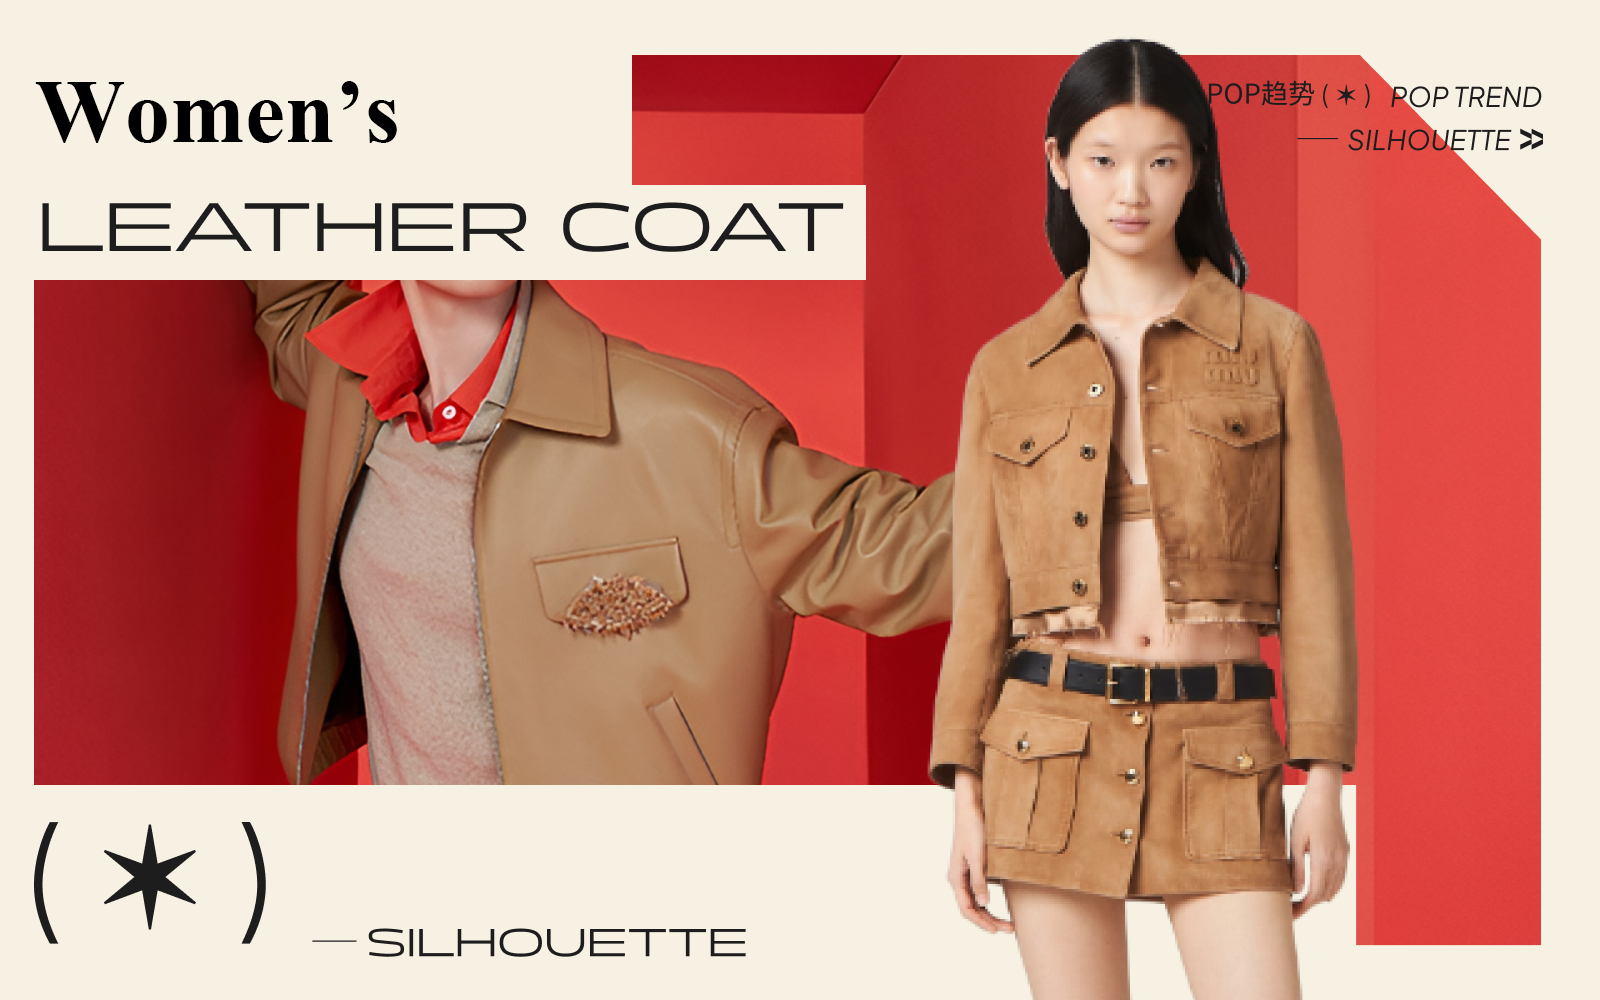 Practical Shaping -- The Silhouette Trend for Women's Leather Clothing